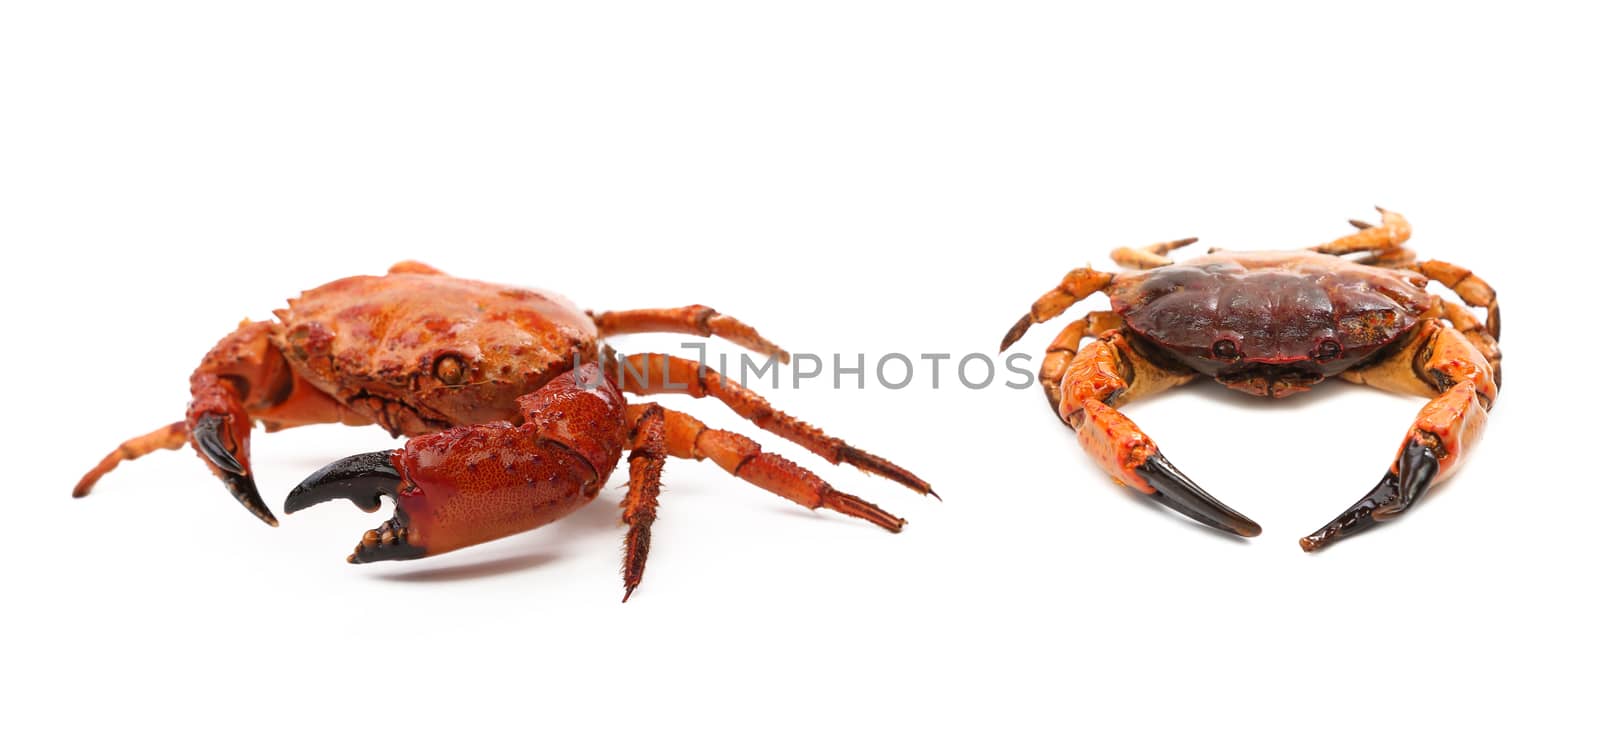 Prepared crabs. Isolated on a white background.